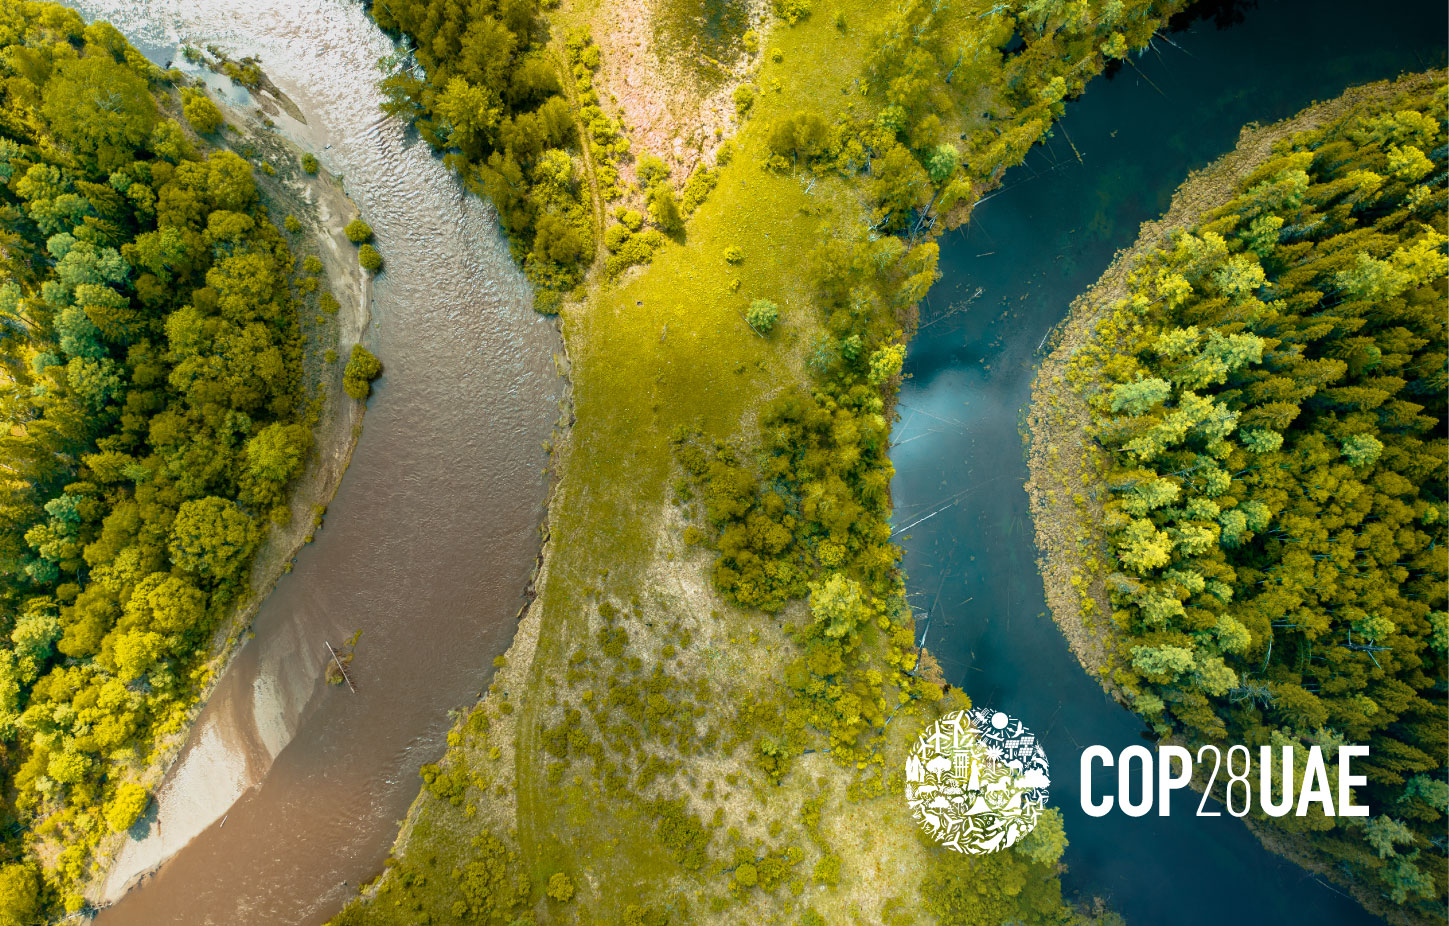 Aerial view of 2 rivers side by side in a green forest: a brown, dirty river on the left and a blue clean river on the right